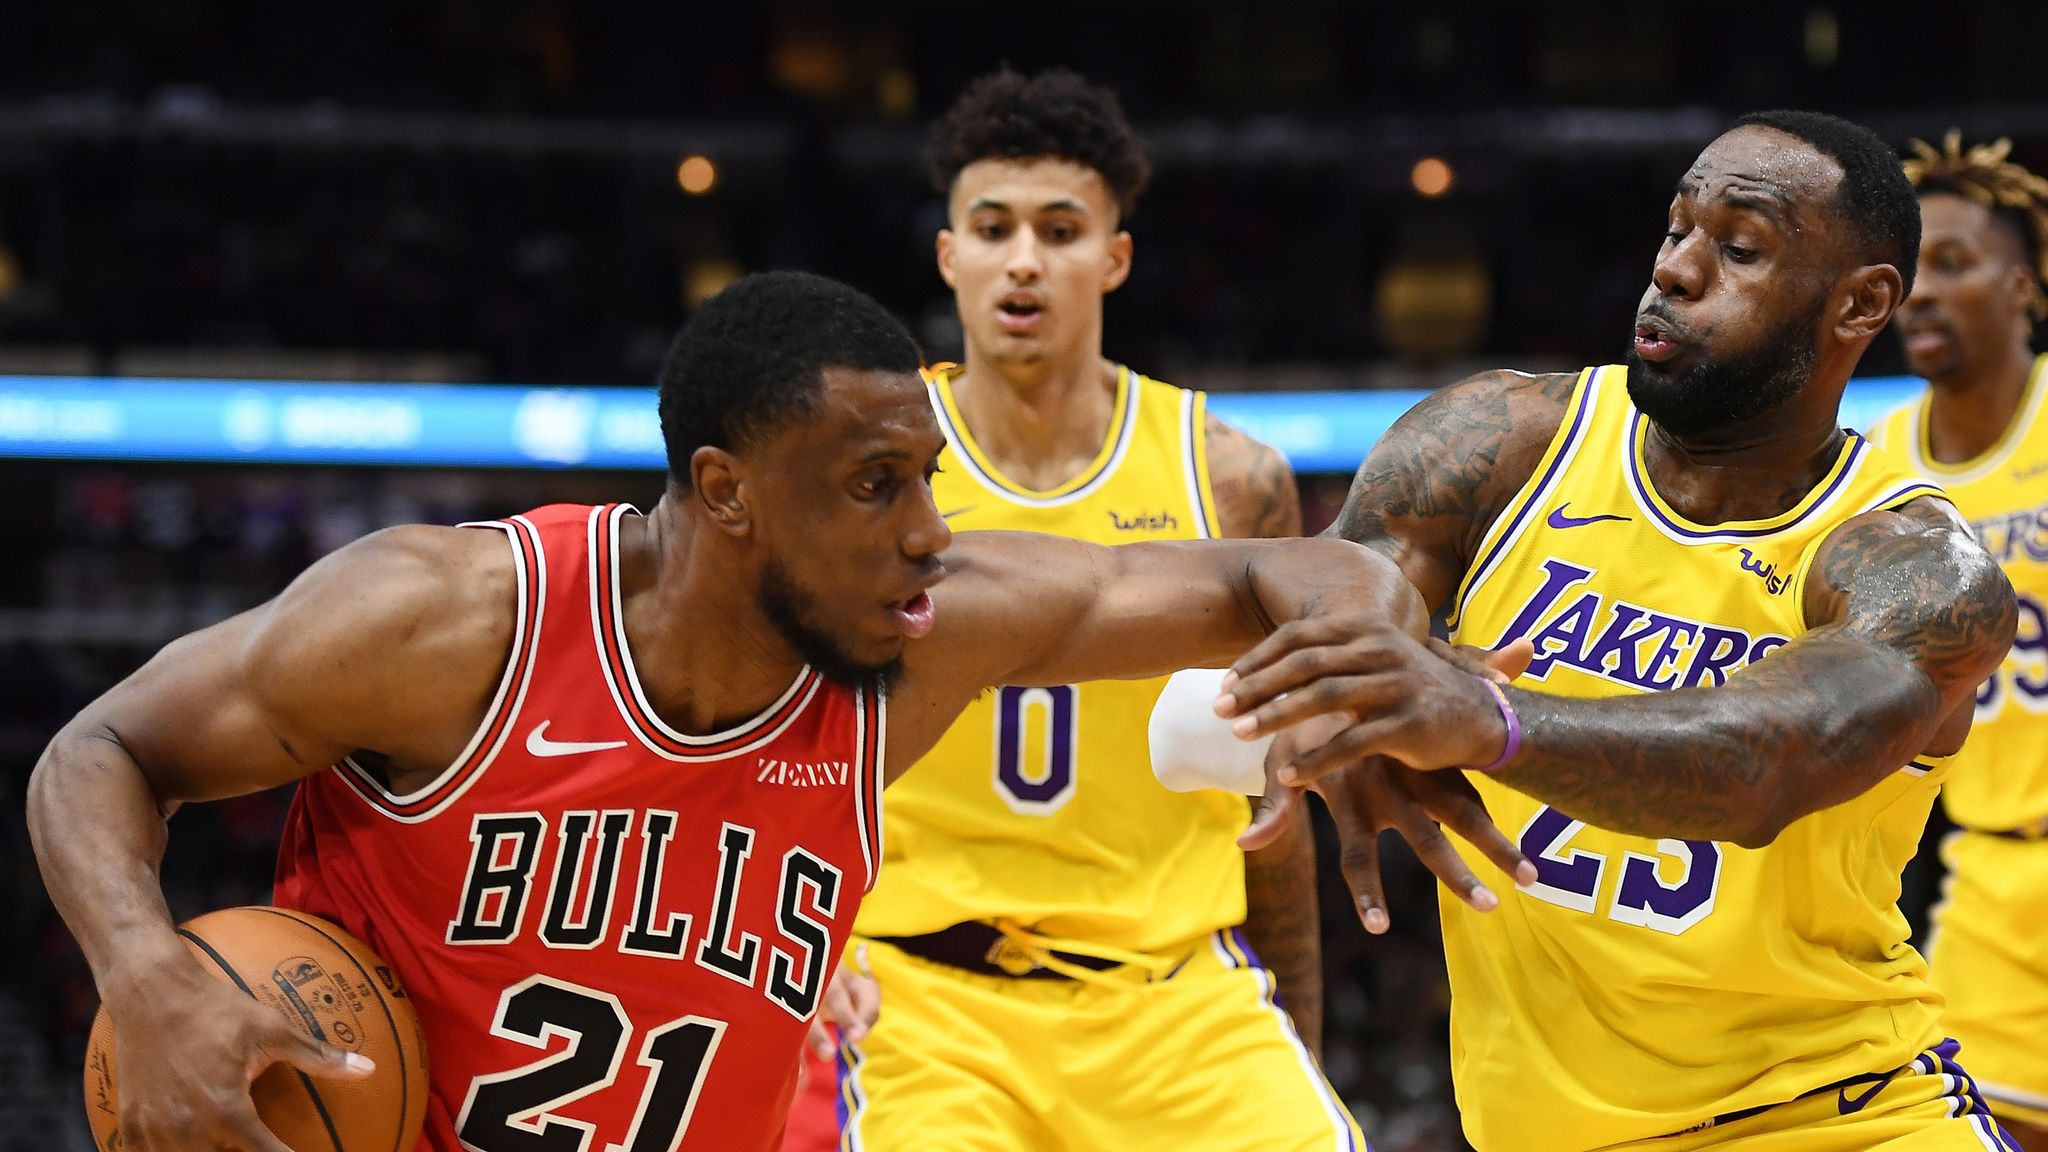 Flipboard: LeBron James praises bench players after Lakers rally to beat Bulls2048 x 1152